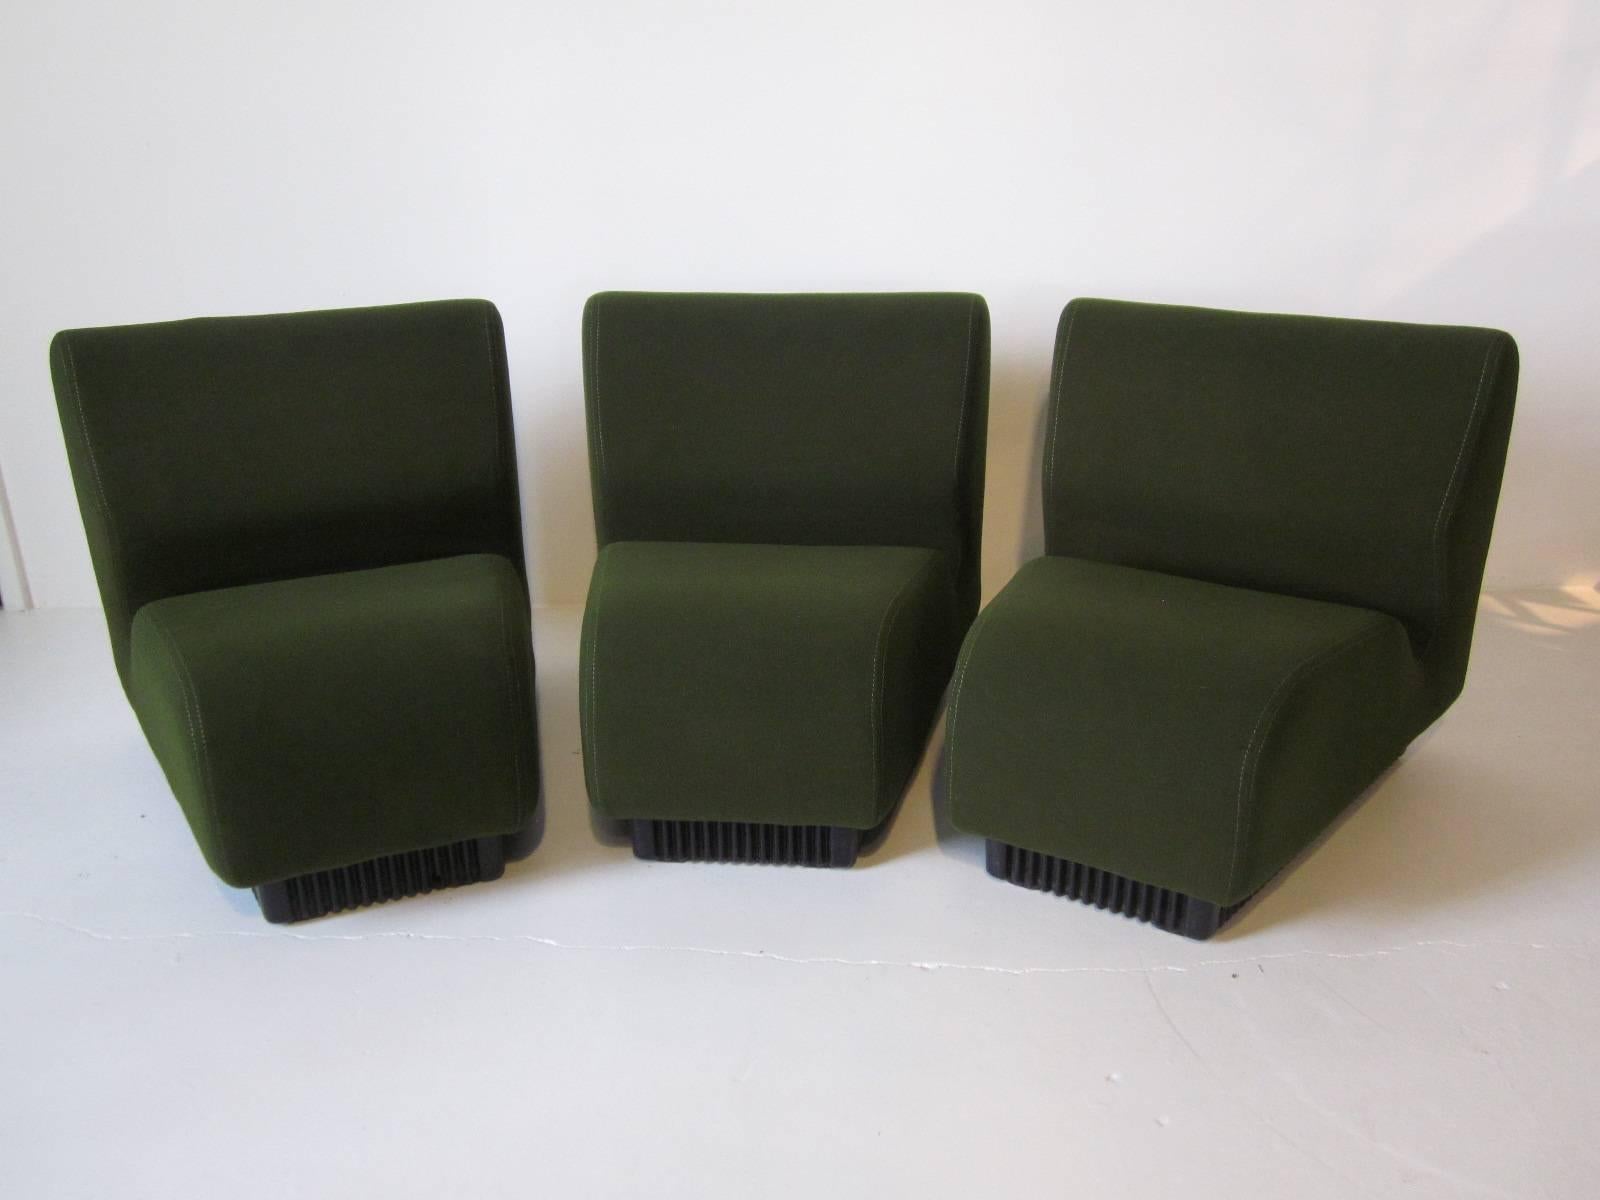 A three-piece pie shaped modular sofa set in olive green using smooth and soft contract fabric sitting on black corrugated ABS plastic bases. They can be used as individual seating or together as a sofa, manufactured by the Herman Miller furniture